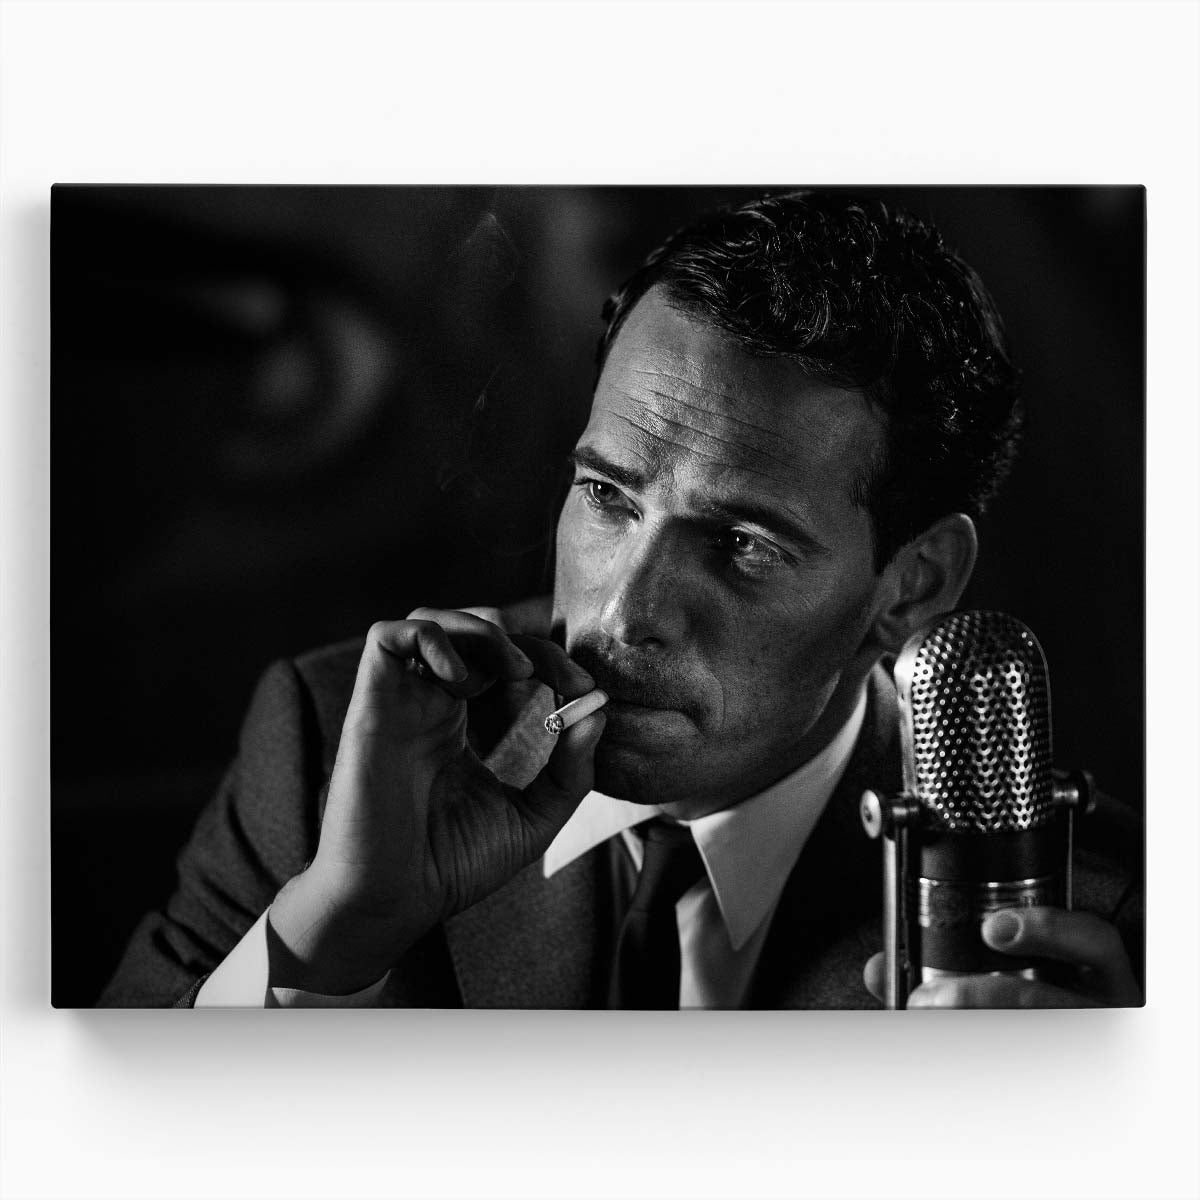 Vintage Cinematic Smoker Portrait in Monochrome by Peter Muller Wall Art by Luxuriance Designs. Made in USA.